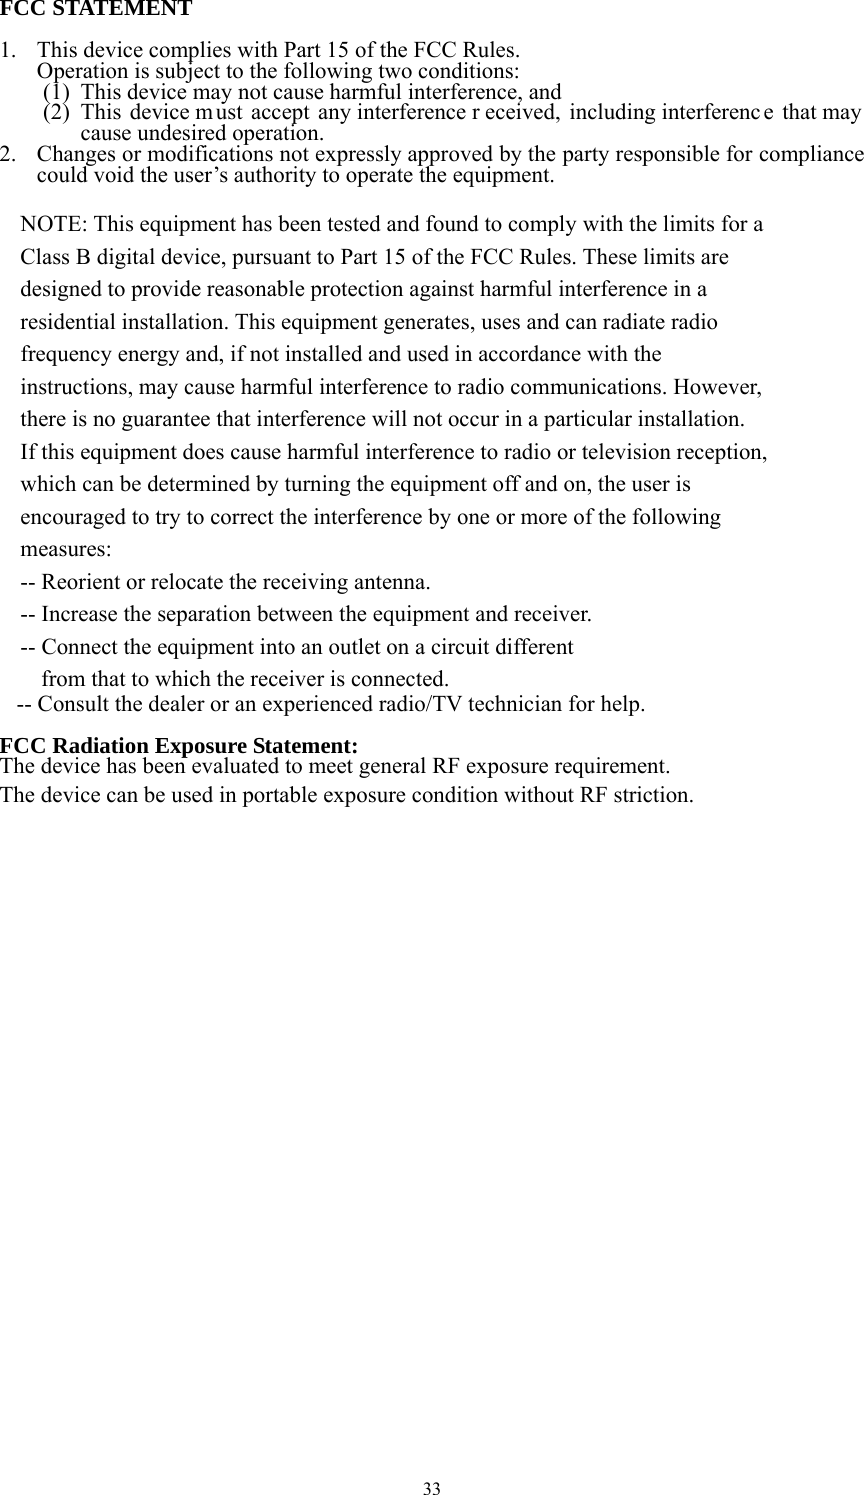 33 FCC STATEMENT  1. This device complies with Part 15 of the FCC Rules. Operation is subject to the following two conditions: (1) This device may not cause harmful interference, and (2) This device m ust accept any interference r eceived, including interferenc e that may  cause undesired operation. 2. Changes or modifications not expressly approved by the party responsible for compliance could void the user’s authority to operate the equipment.  NOTE: This equipment has been tested and found to comply with the limits for a Class B digital device, pursuant to Part 15 of the FCC Rules. These limits are designed to provide reasonable protection against harmful interference in a residential installation. This equipment generates, uses and can radiate radio frequency energy and, if not installed and used in accordance with the instructions, may cause harmful interference to radio communications. However, there is no guarantee that interference will not occur in a particular installation. If this equipment does cause harmful interference to radio or television reception, which can be determined by turning the equipment off and on, the user is encouraged to try to correct the interference by one or more of the following measures: -- Reorient or relocate the receiving antenna. -- Increase the separation between the equipment and receiver. -- Connect the equipment into an outlet on a circuit different from that to which the receiver is connected.    -- Consult the dealer or an experienced radio/TV technician for help.  FCC Radiation Exposure Statement:  The device has been evaluated to meet general RF exposure requirement.   The device can be used in portable exposure condition without RF striction.  